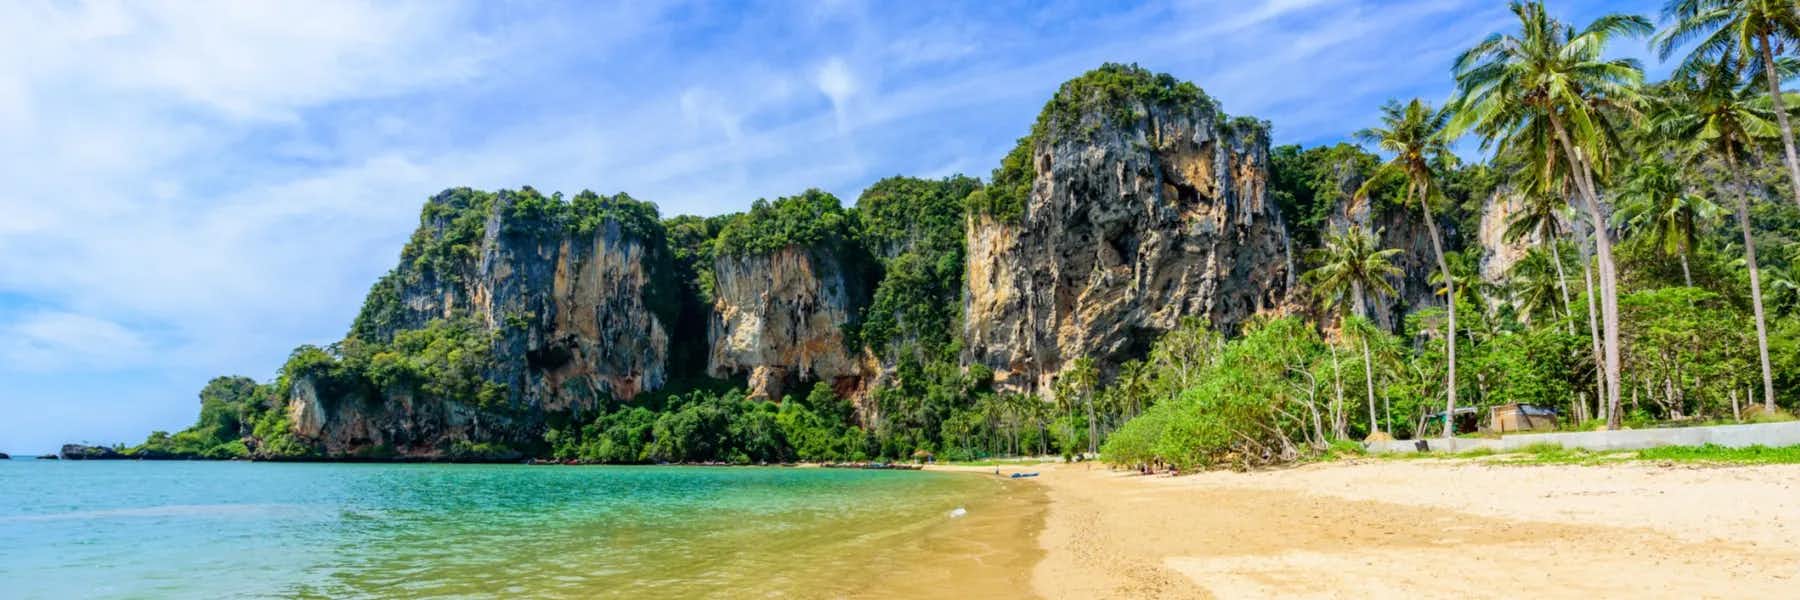 The 6 Best Beaches in Thailand for the Perfect Retirement by the Sea